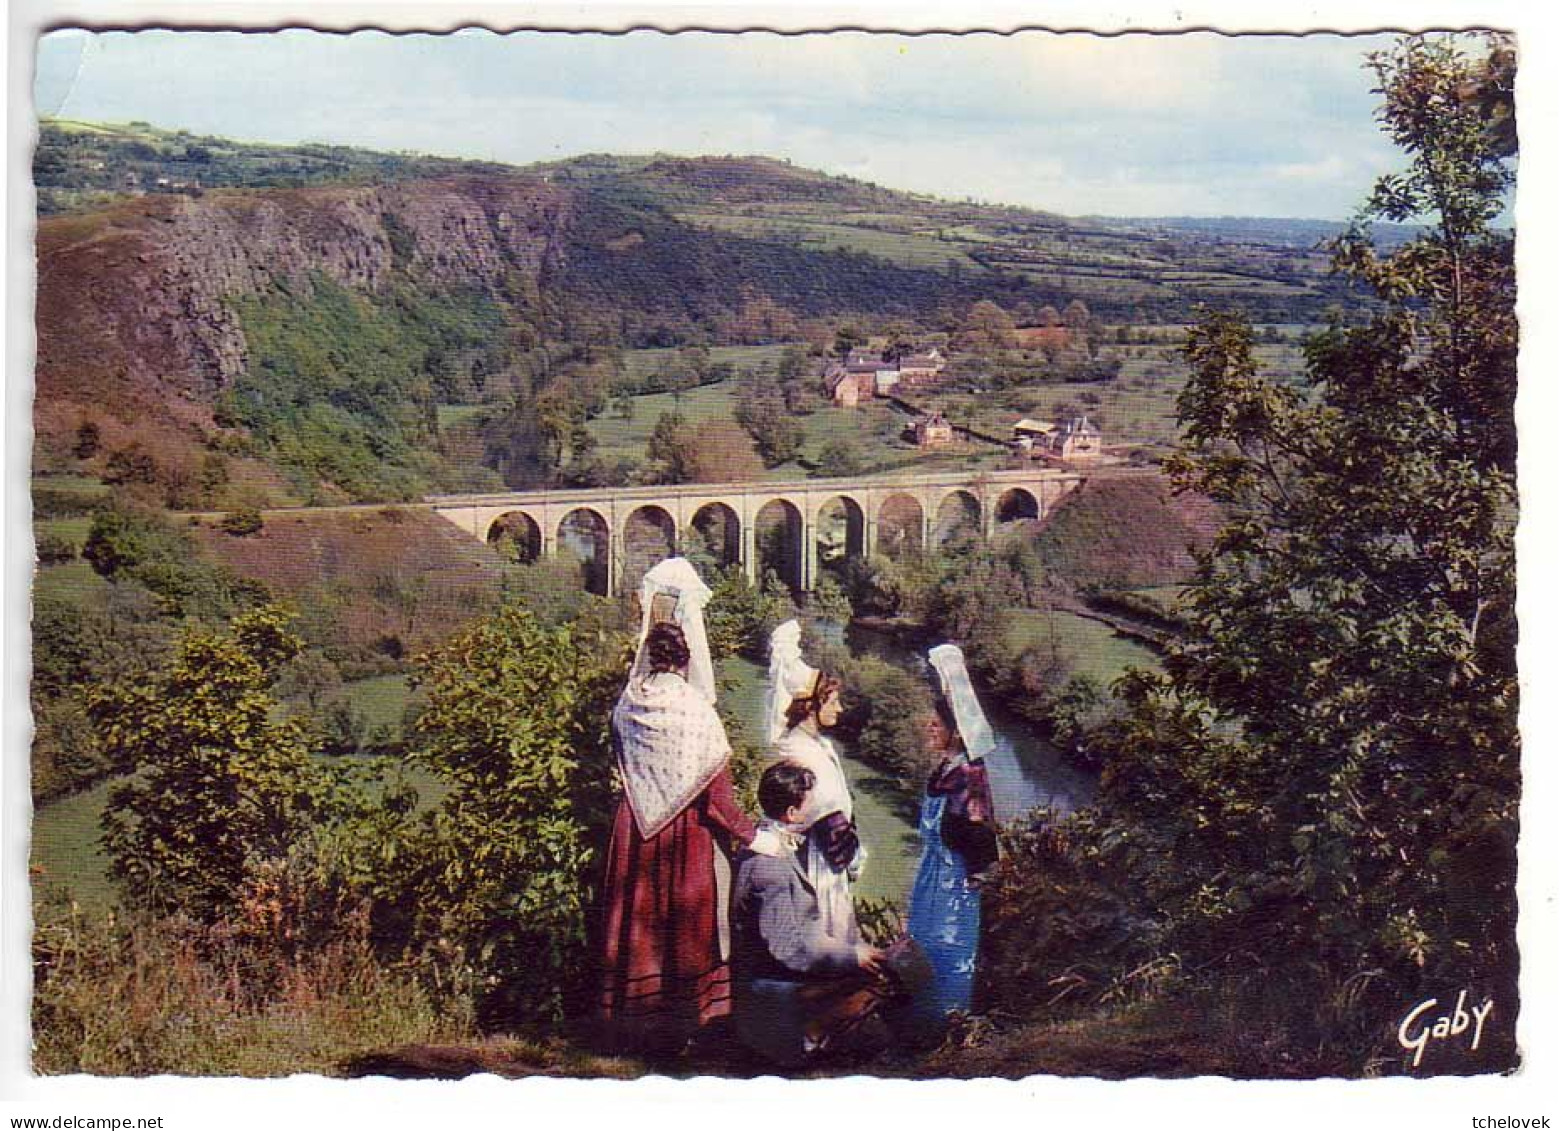 (14). Clecy. 234 & (3) & 104 & 151 viaduc SNCF